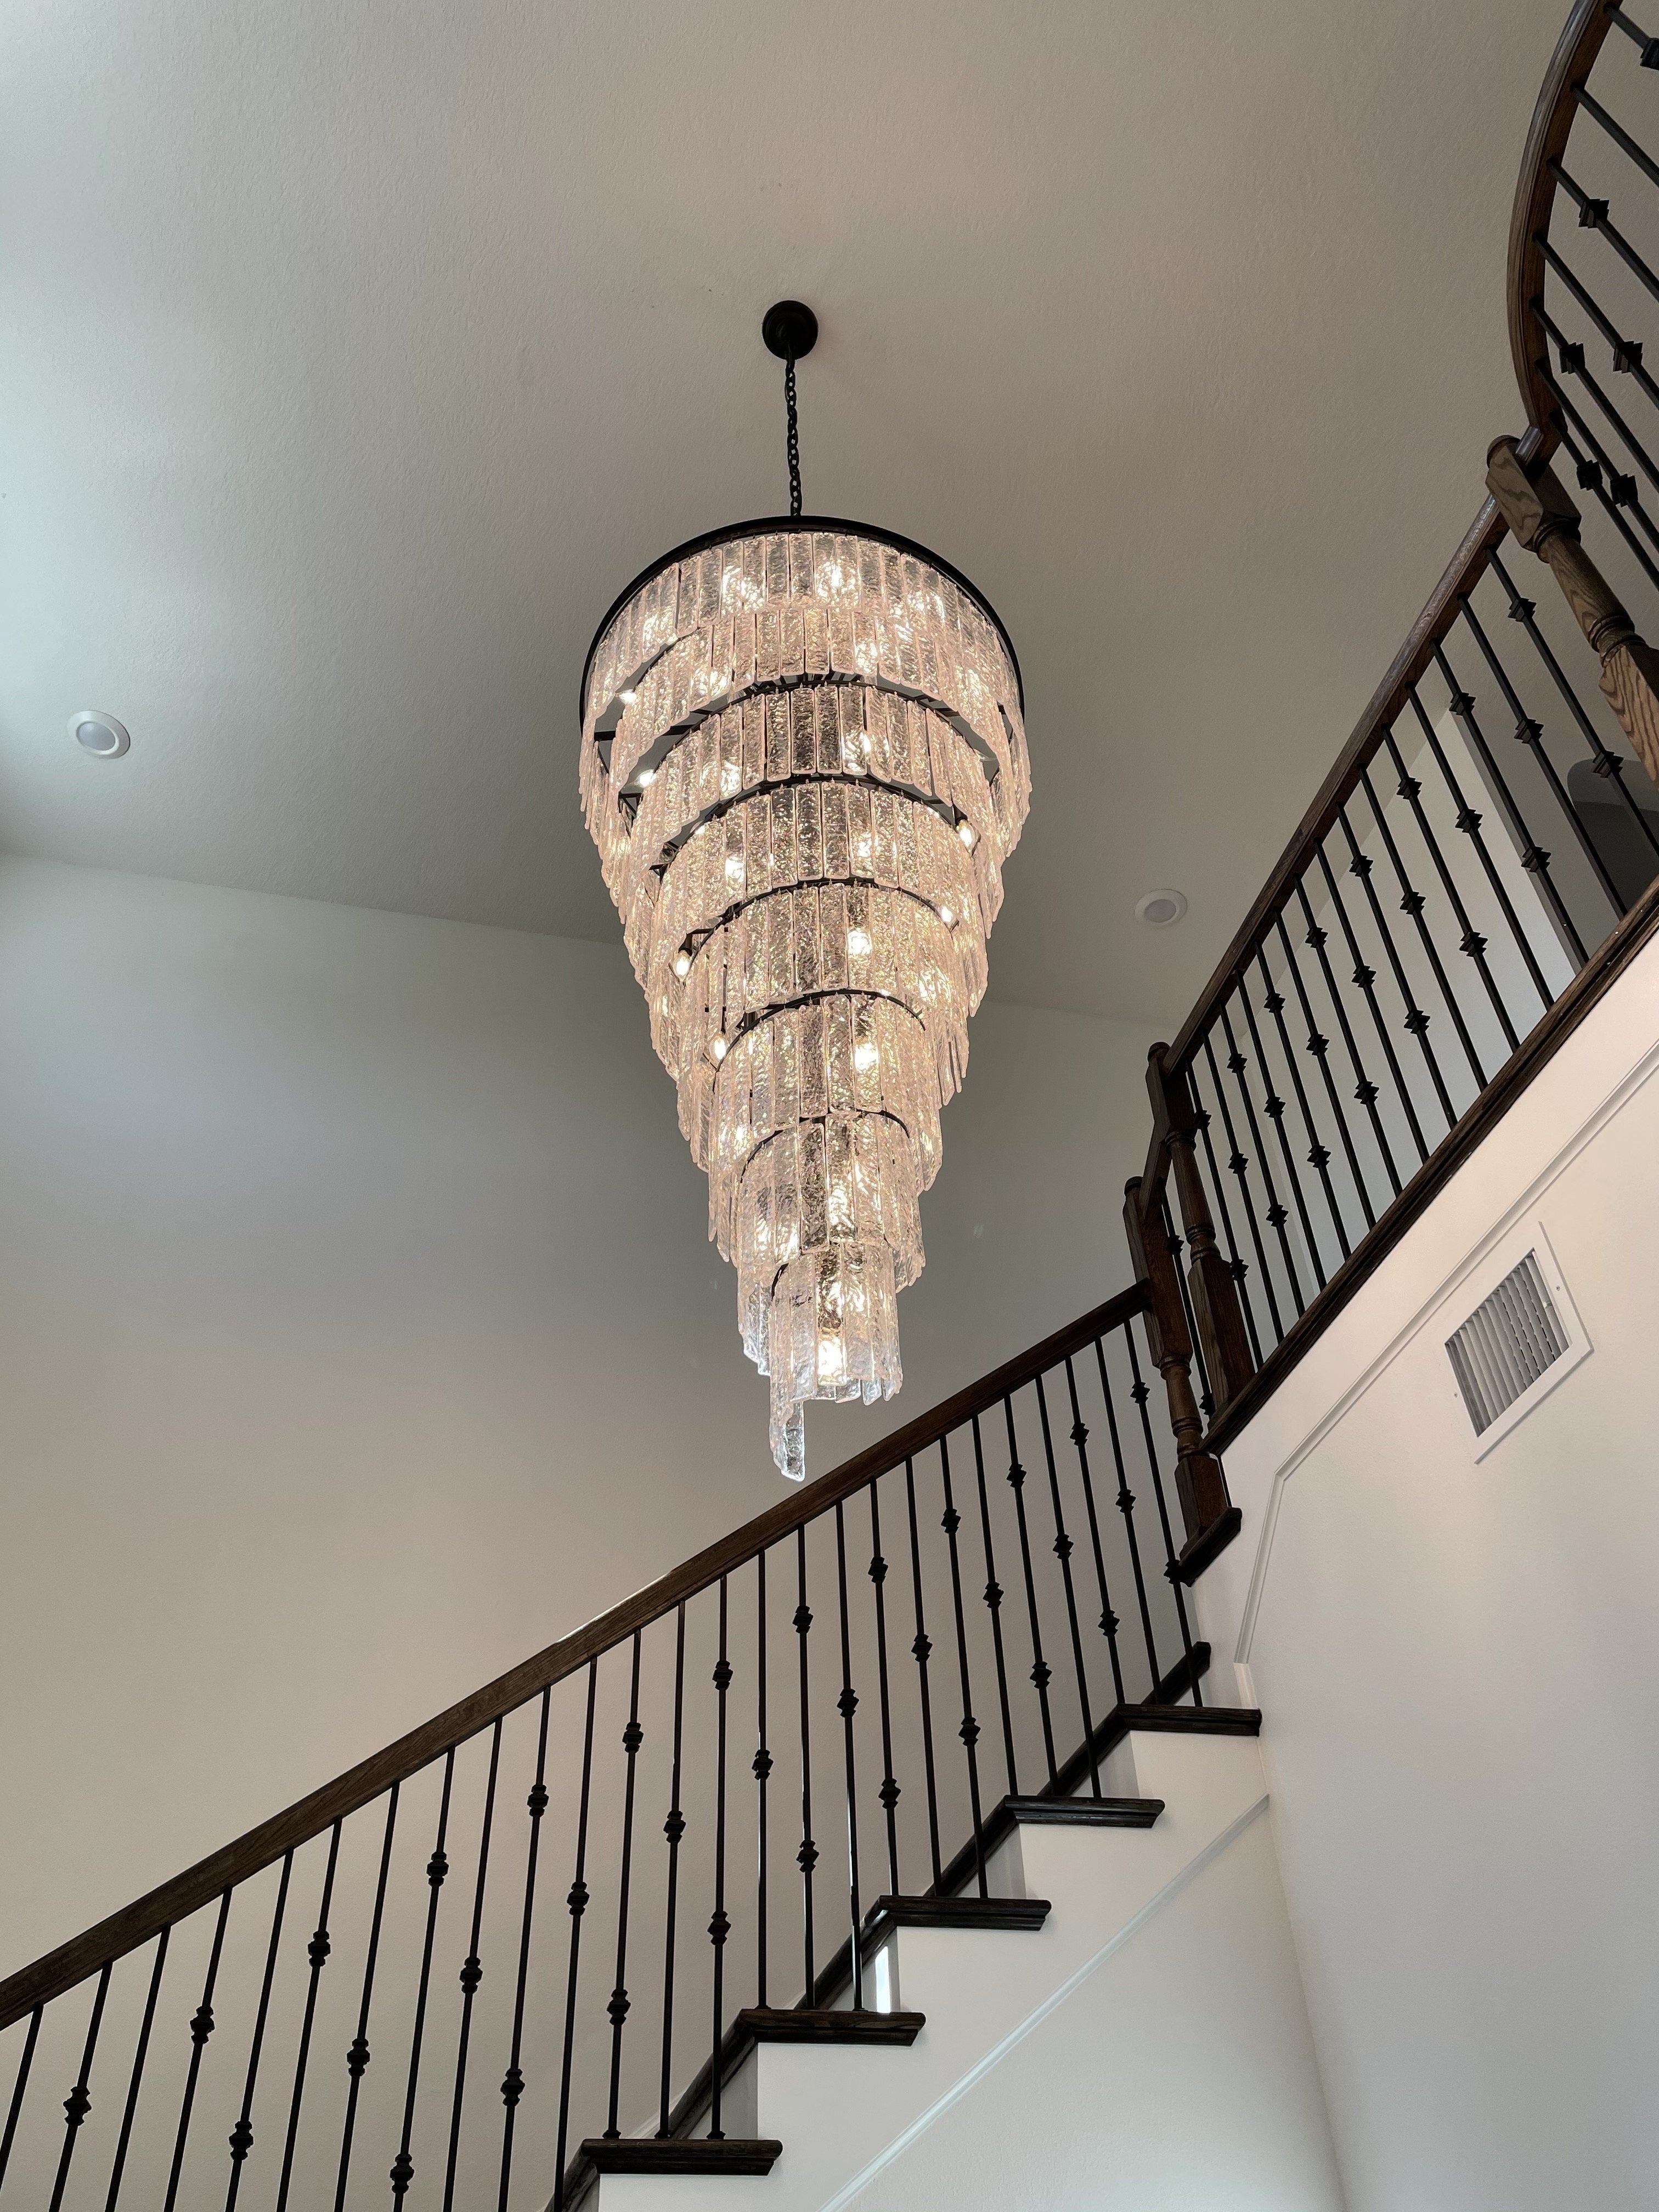 Seline Spiral Tiered/ Layered Cracked Textured Glass Chandelier - Italian Concept - 